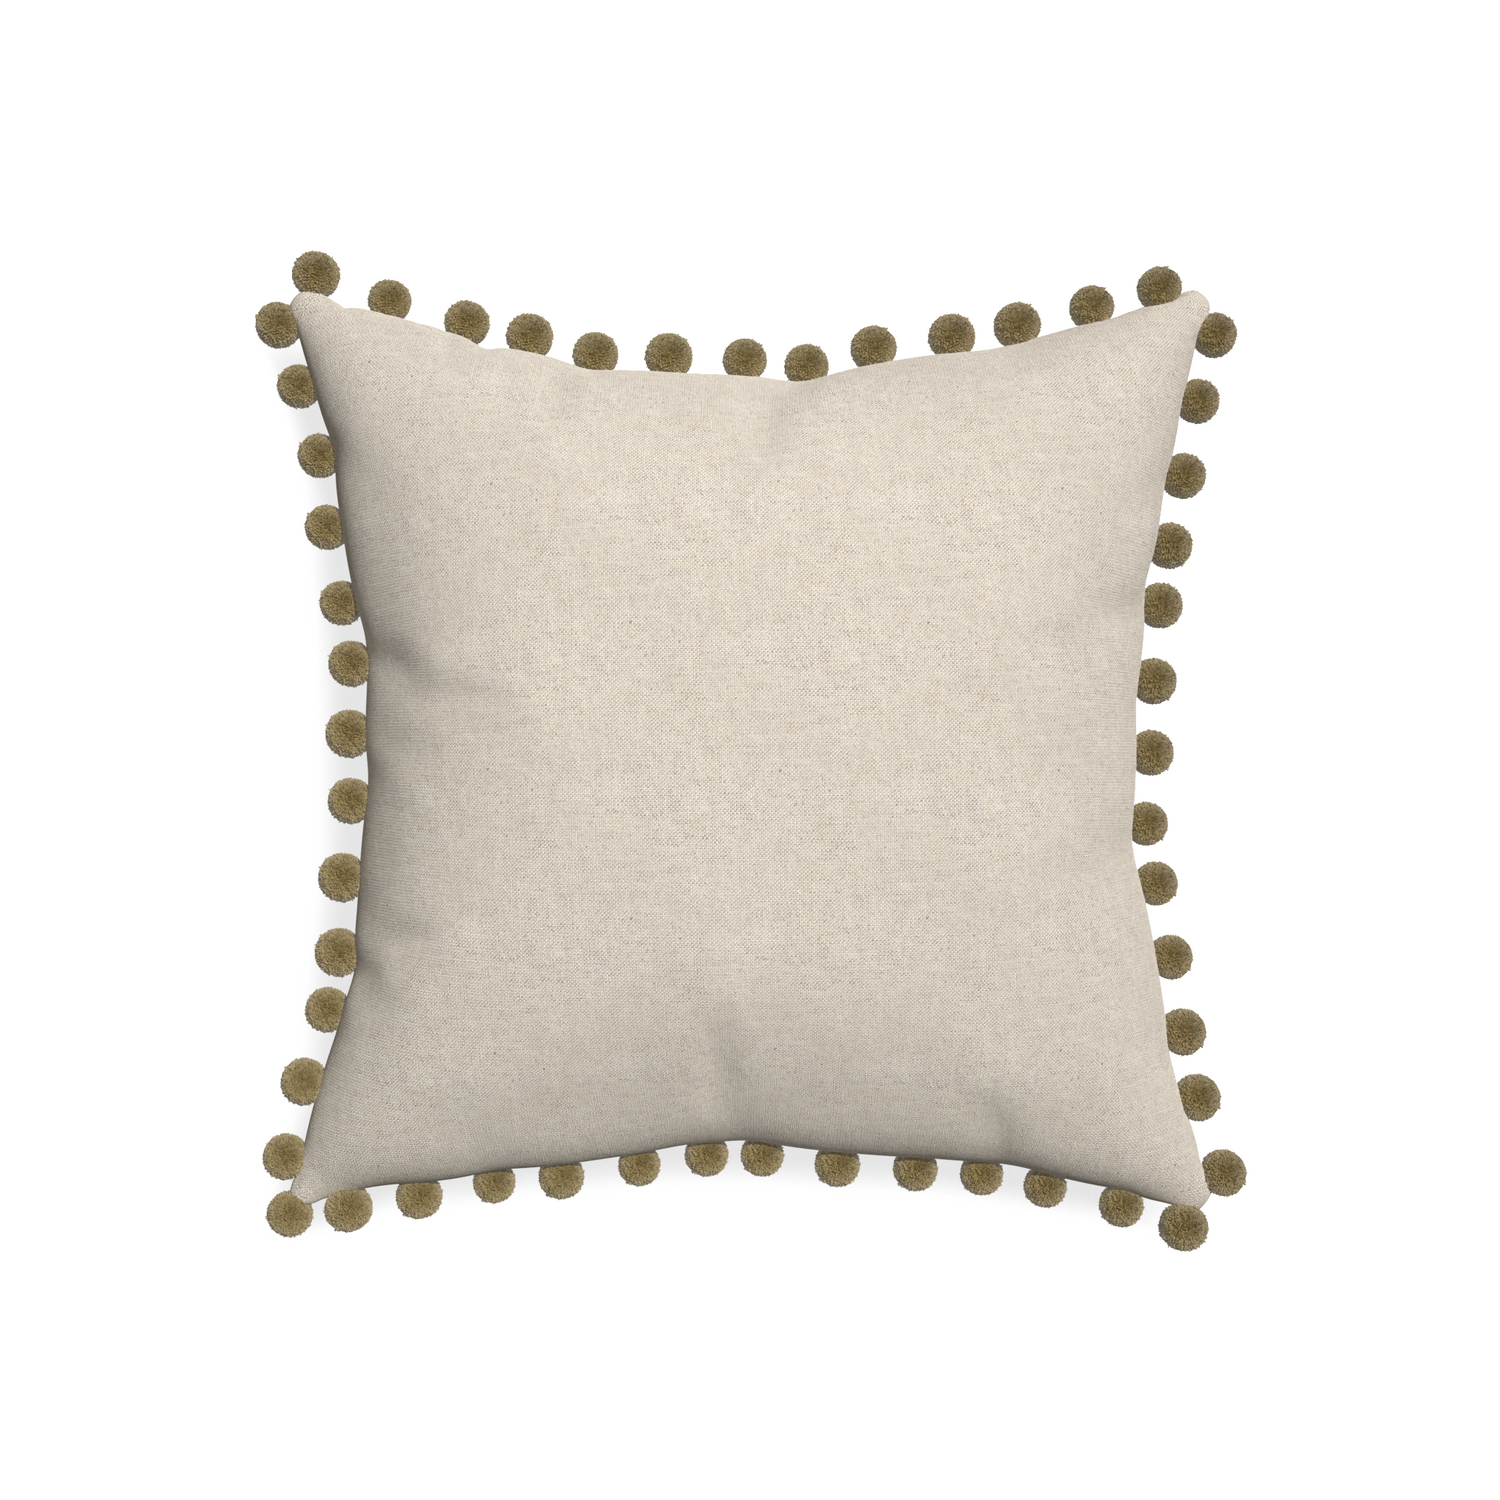 20-square oat custom pillow with olive pom pom on white background